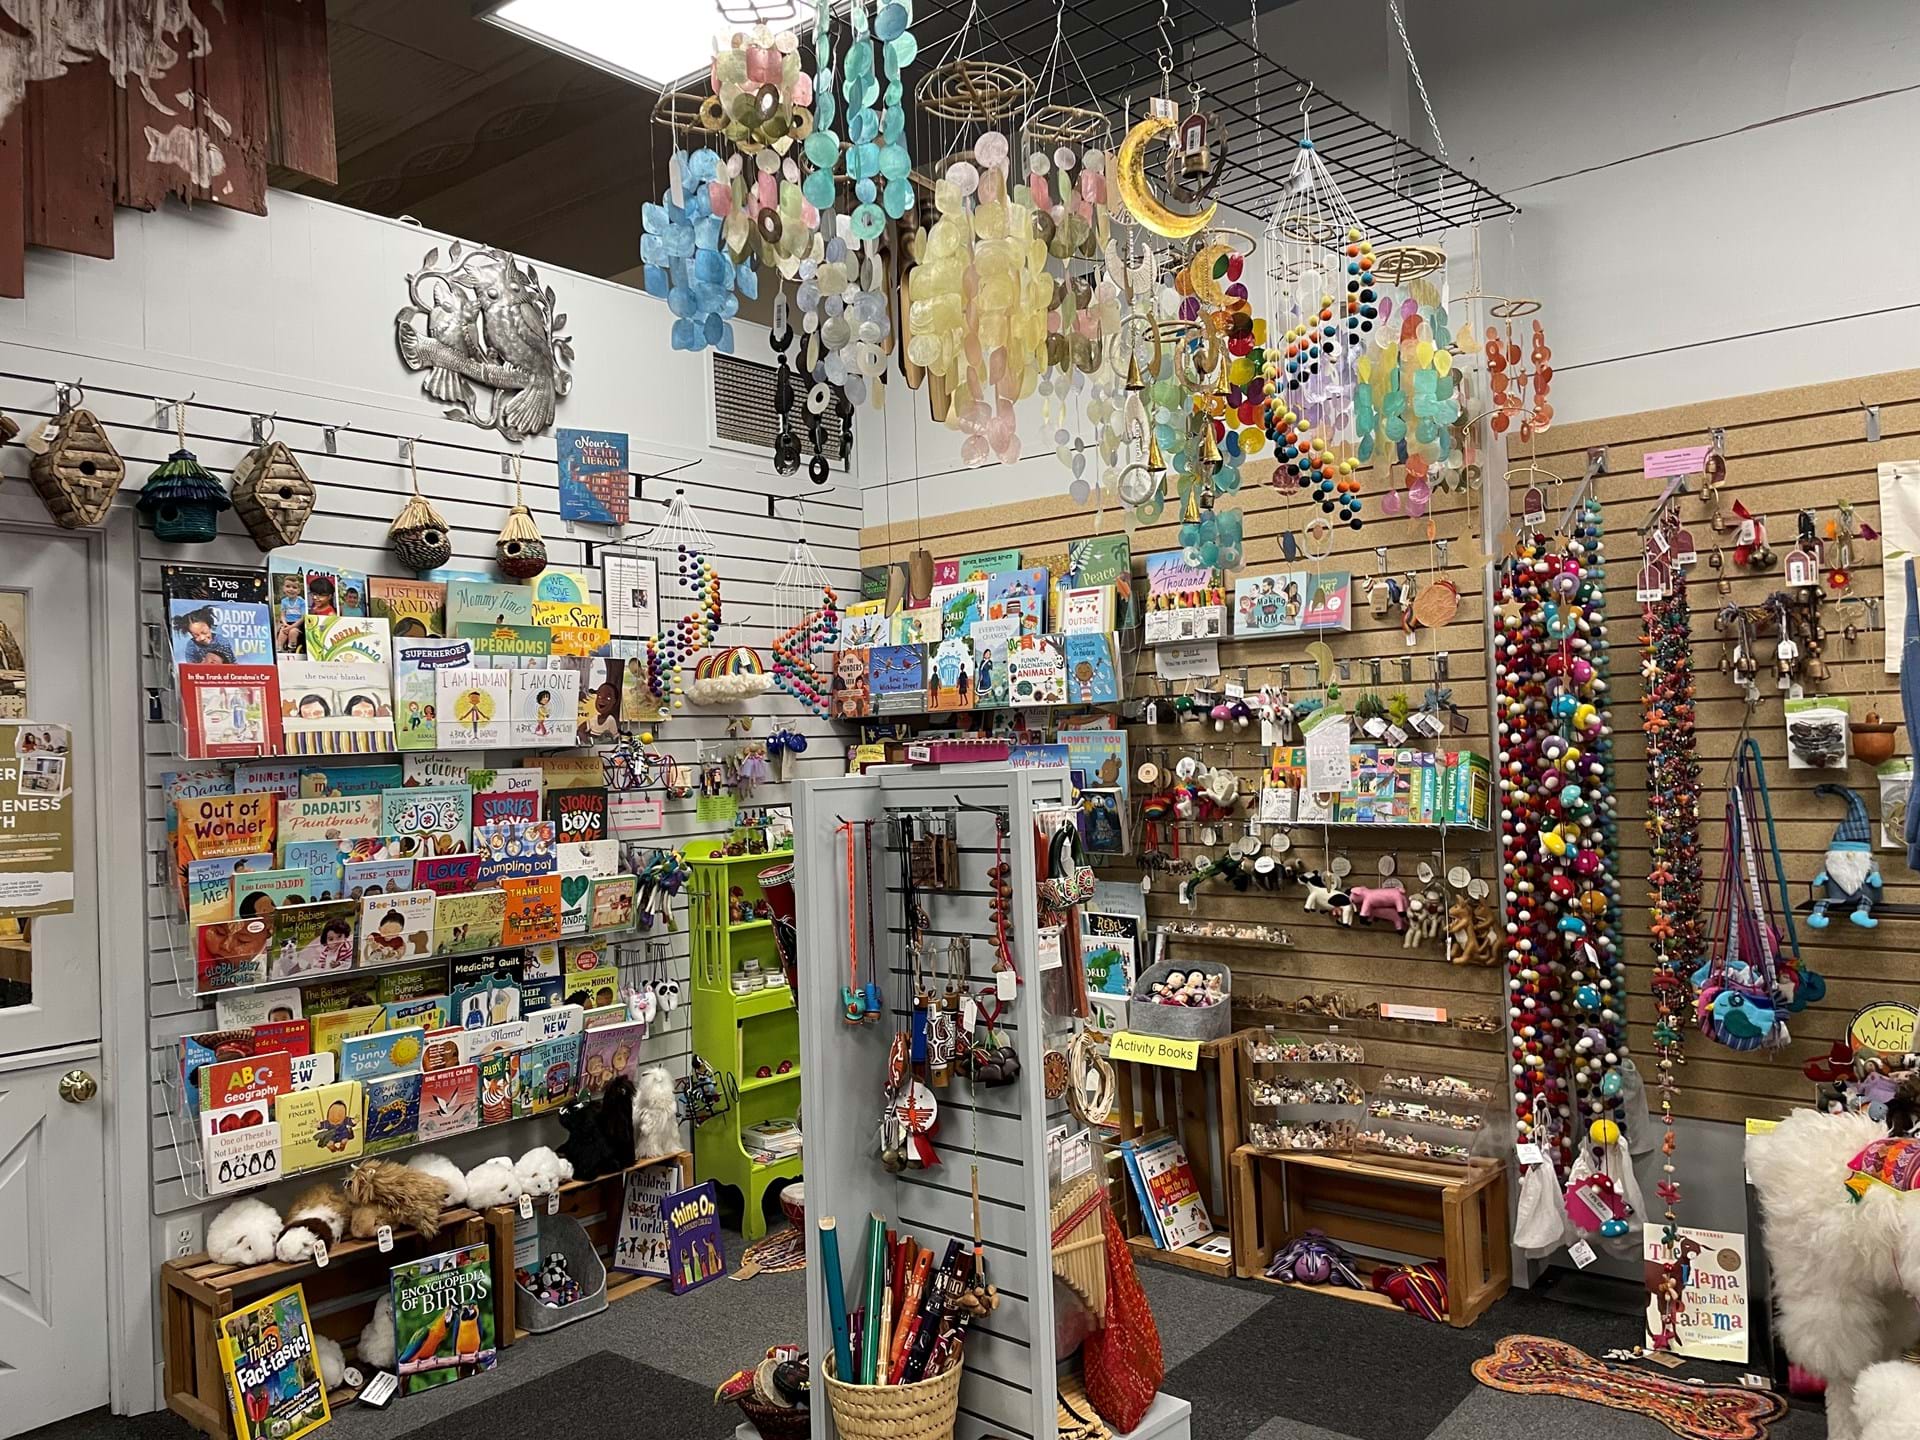 We have lots of hanging chimes available, along with books and toys!